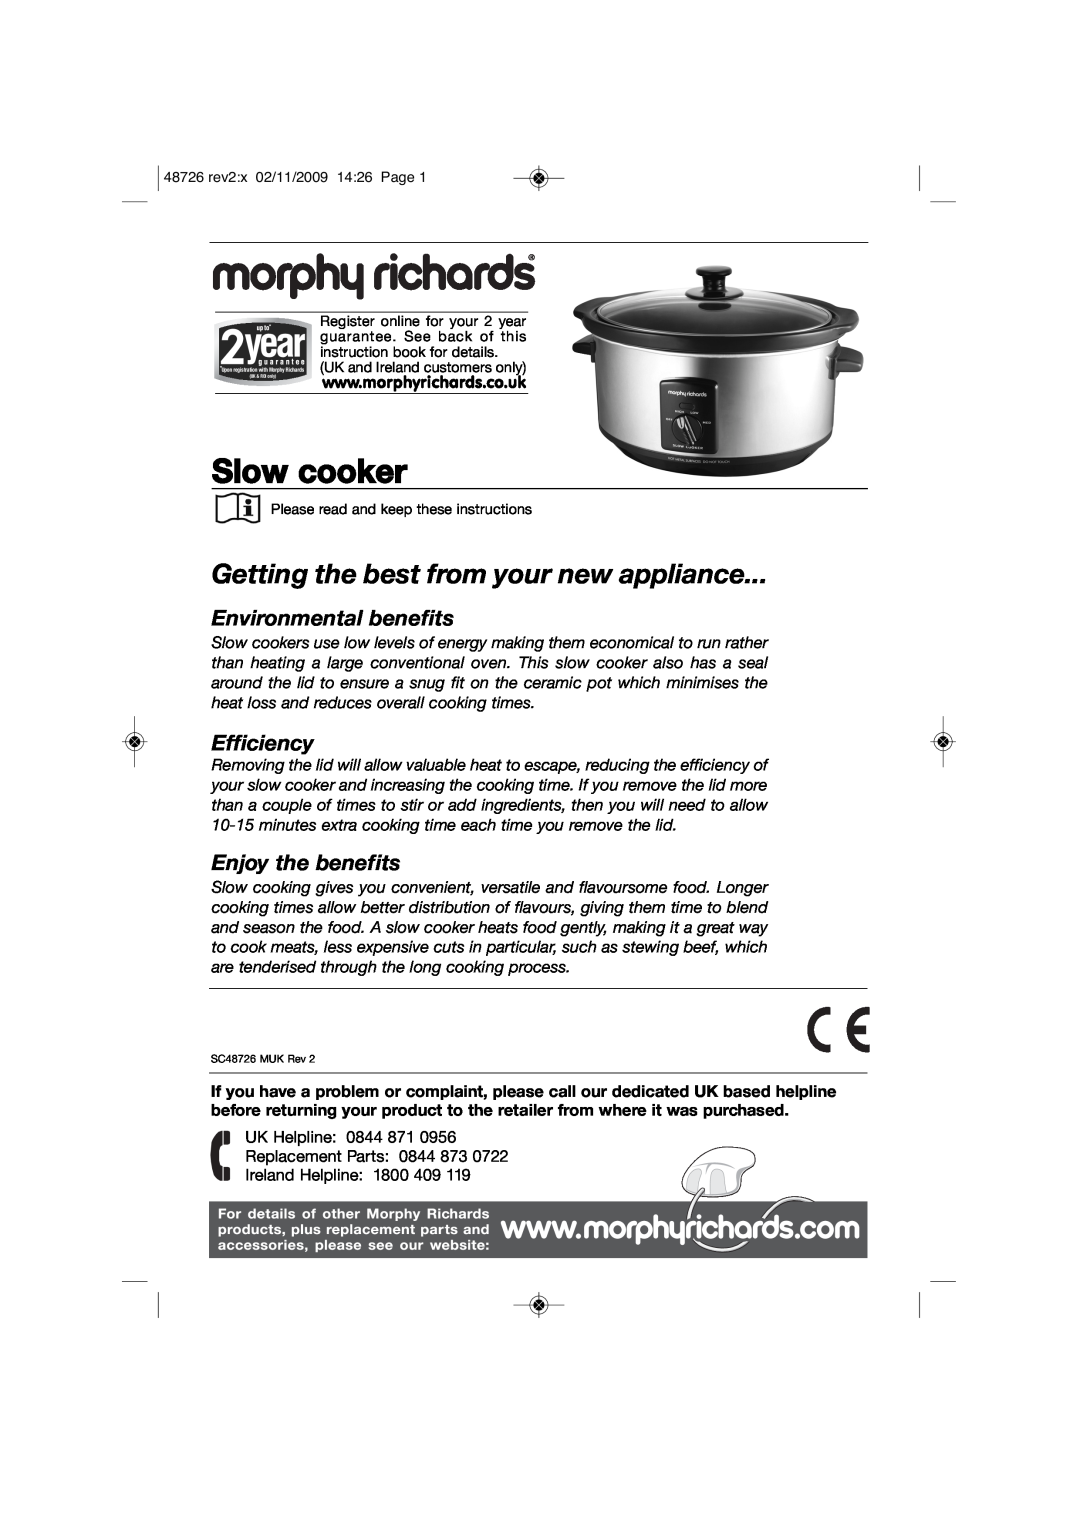 Morphy Richards Slow Cooker manual Slow cooker, Getting the best from your new appliance, Environmental benefits 